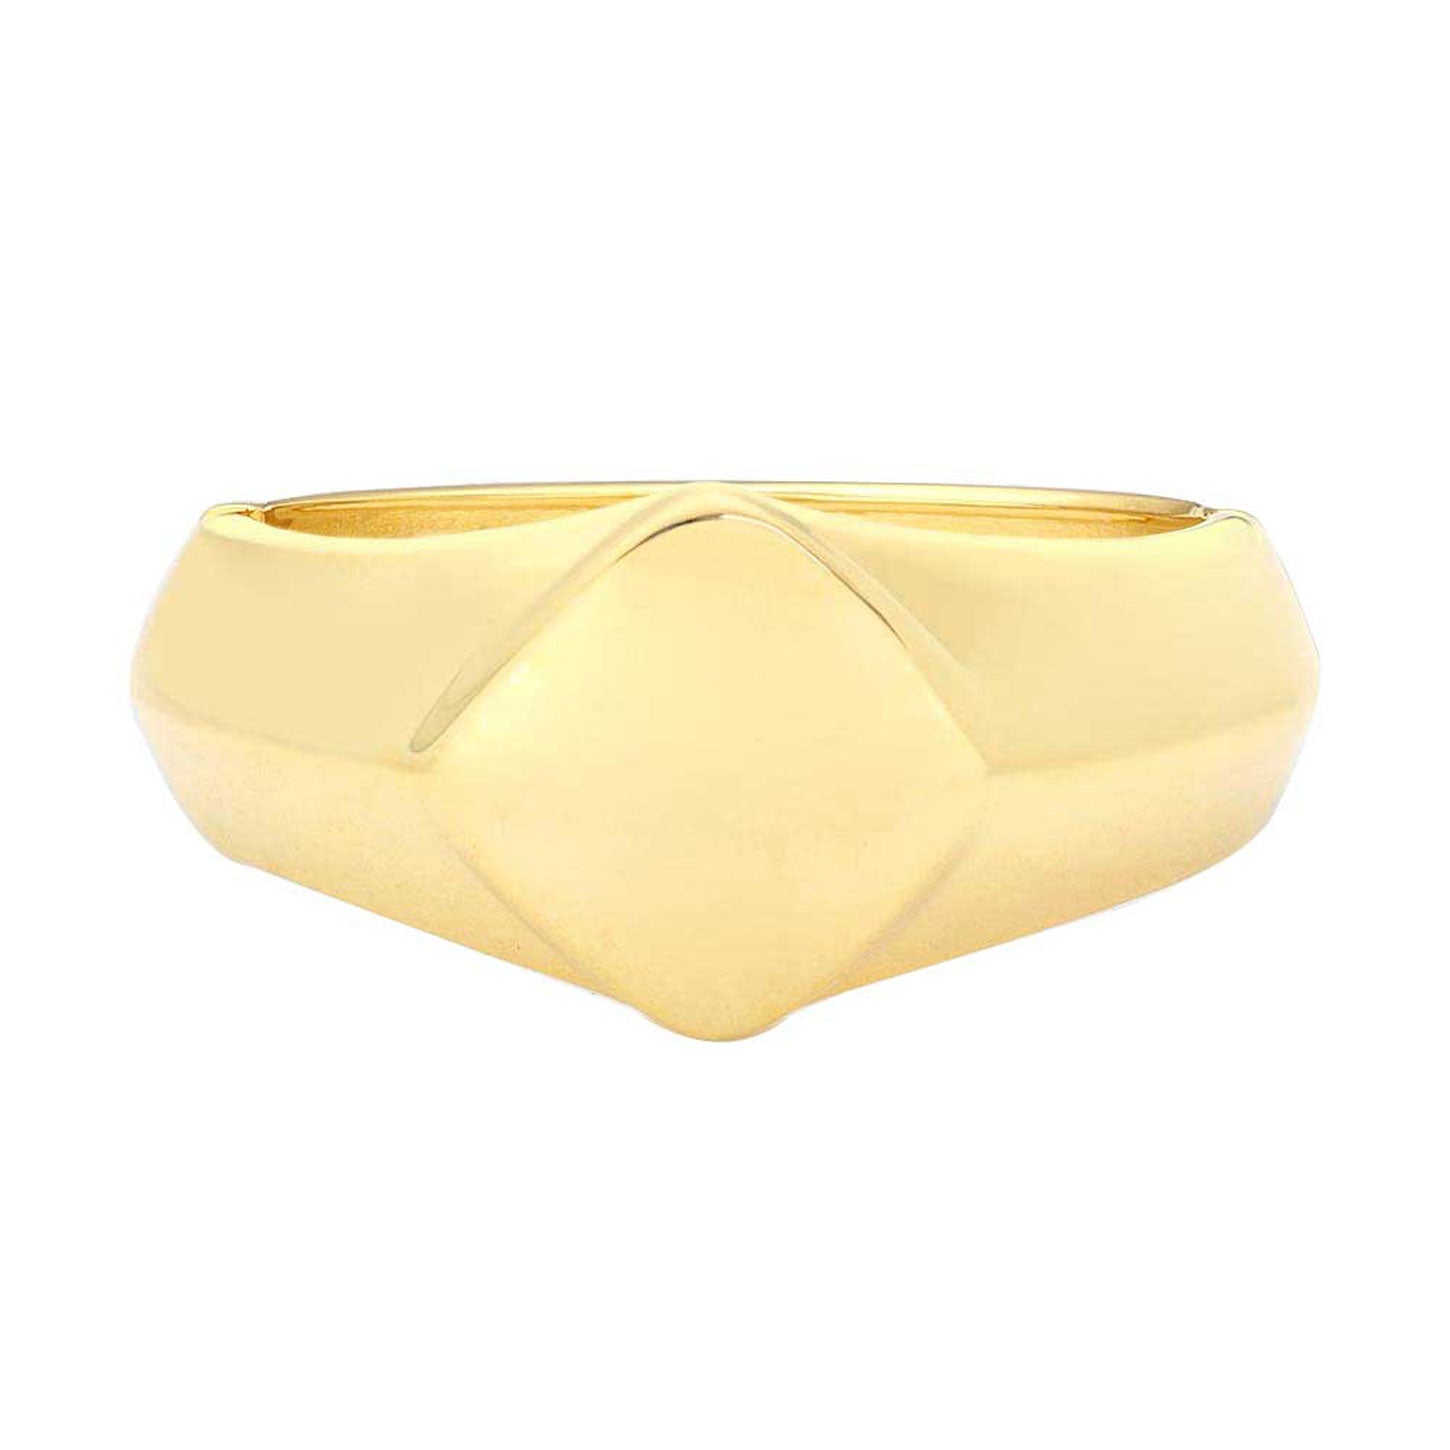 Gold Hinged Metal Bangle Bracelet. Get ready with these hinged metal bangle bracelet, put on a pop of color to complete your ensemble. Perfect for adding just the right amount of shimmer & shine and a touch of class to special events. Perfect Birthday Gift, Valentine's Gift, Anniversary Gift, Mother's Day Gift, Graduation Gift, Valentine's Day Gift.